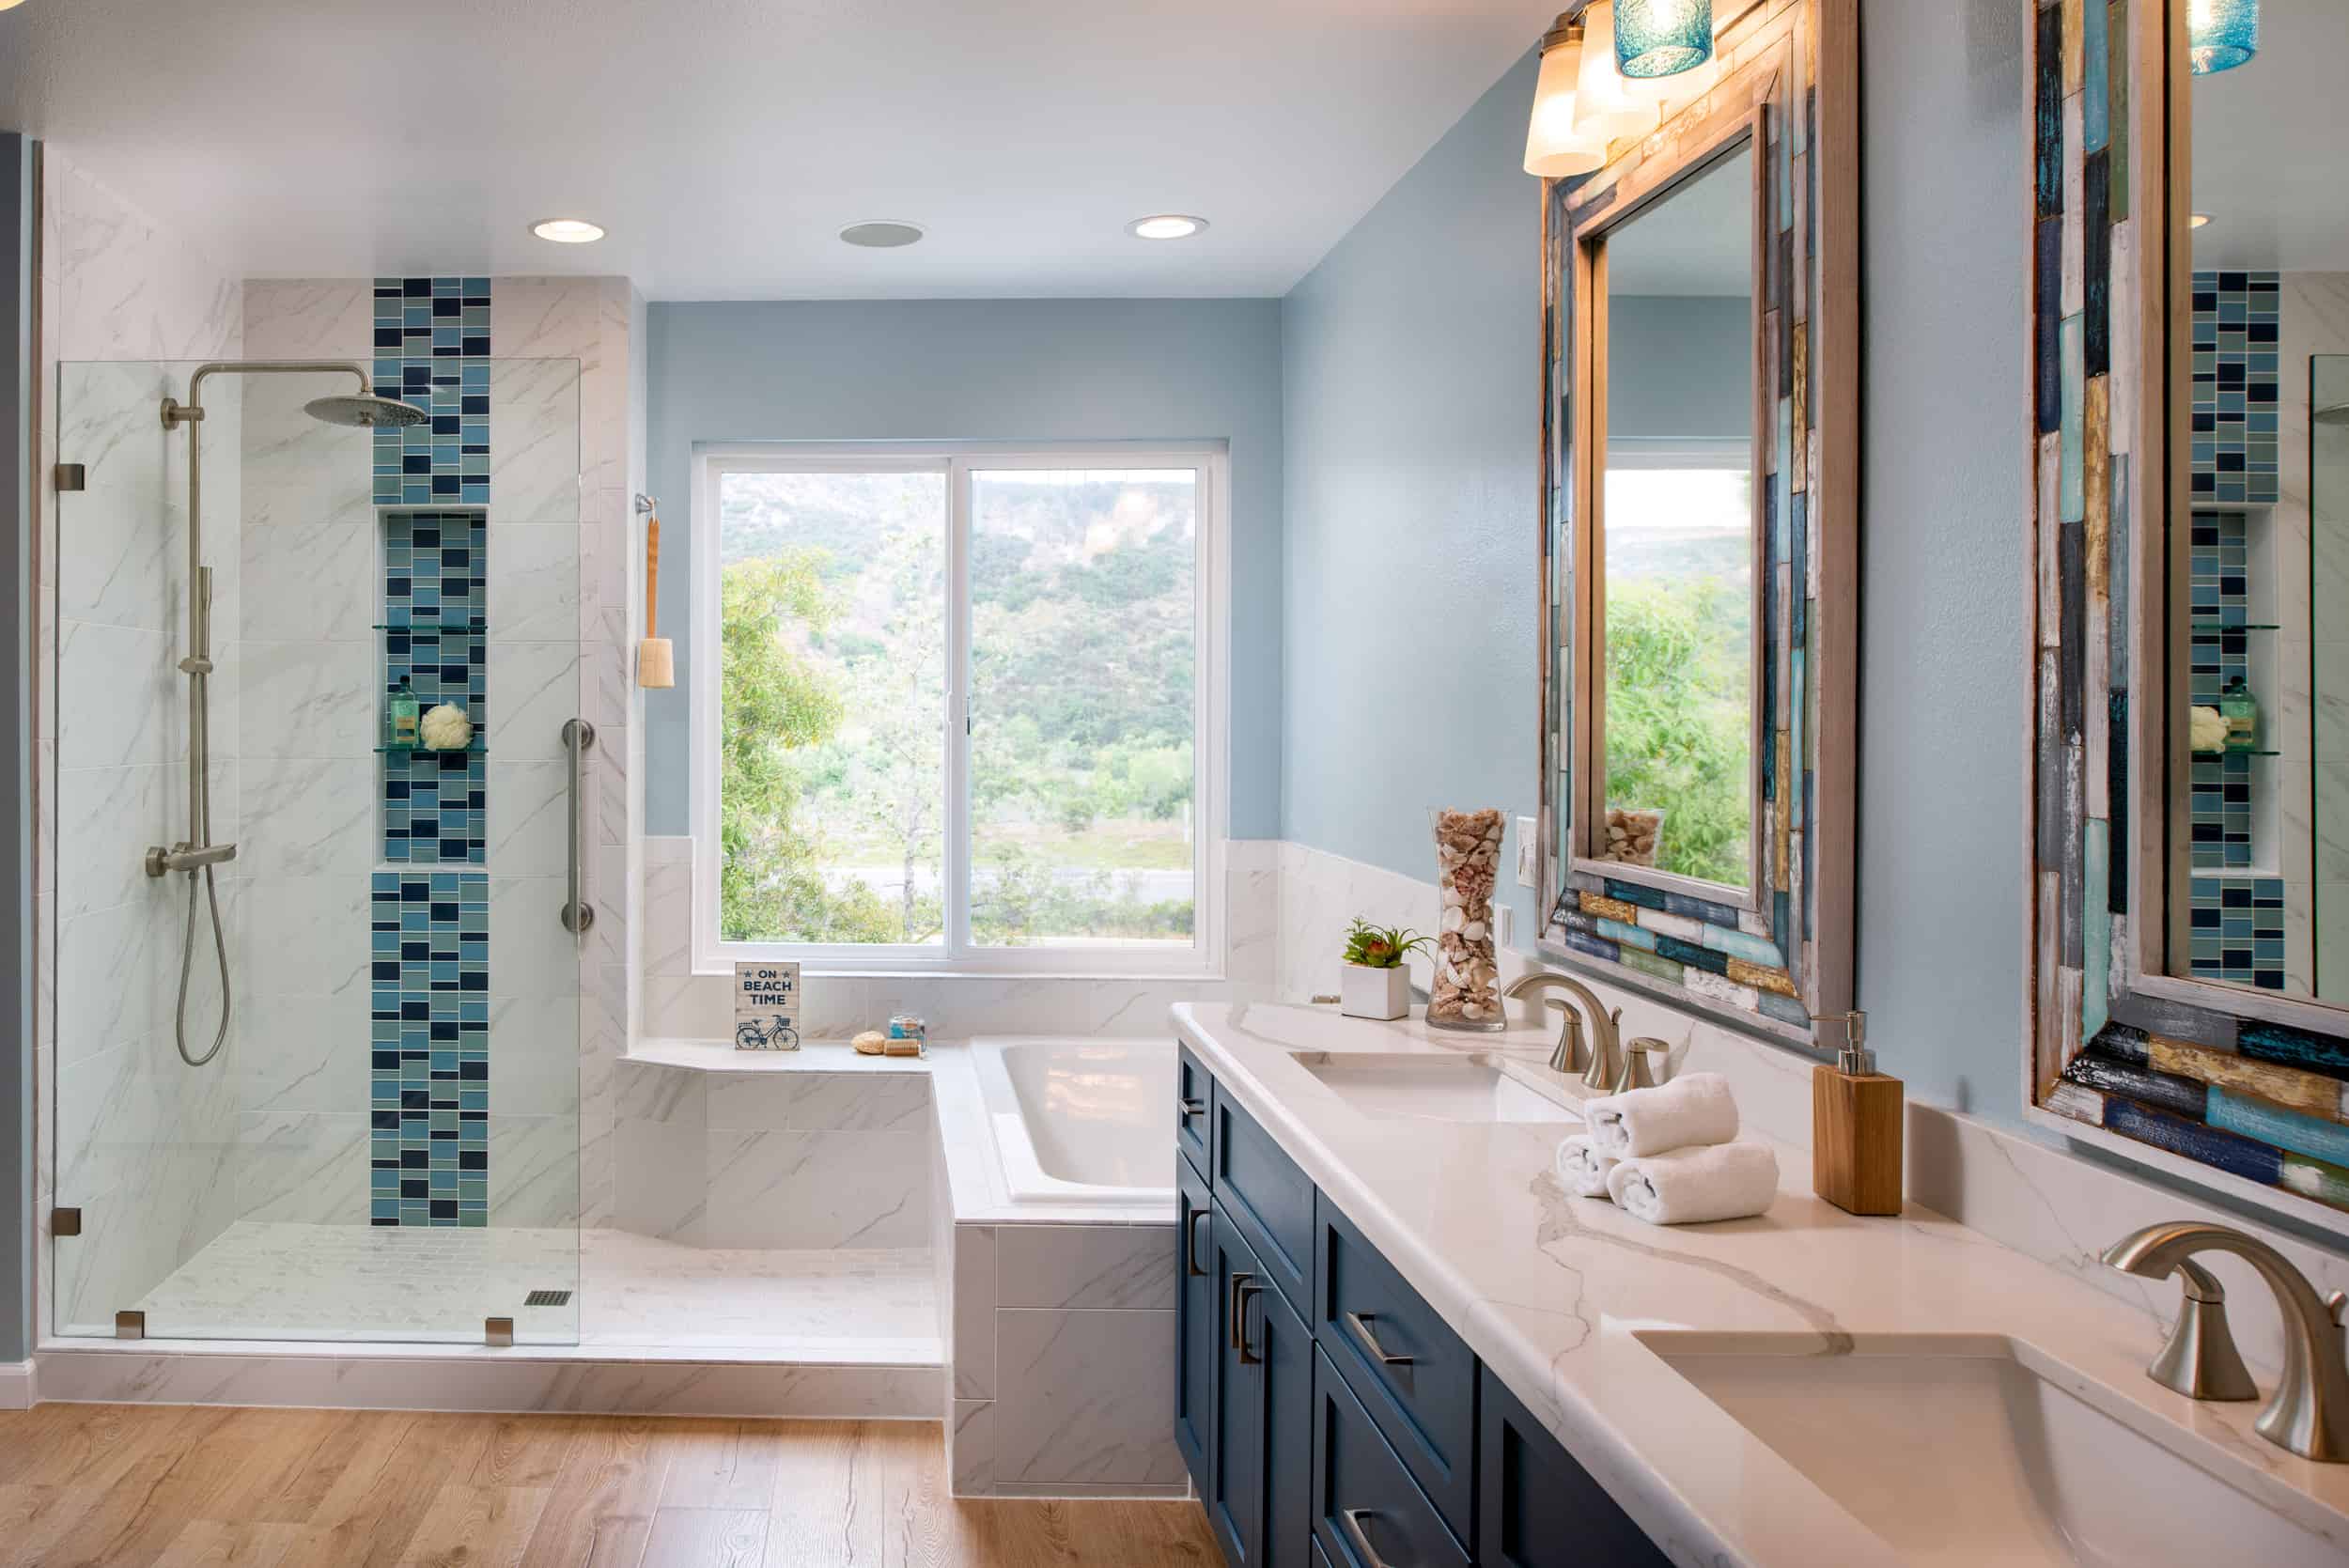 Cost Of Adding A Bathroom Remodel Works, Cost Of Bathroom Addition